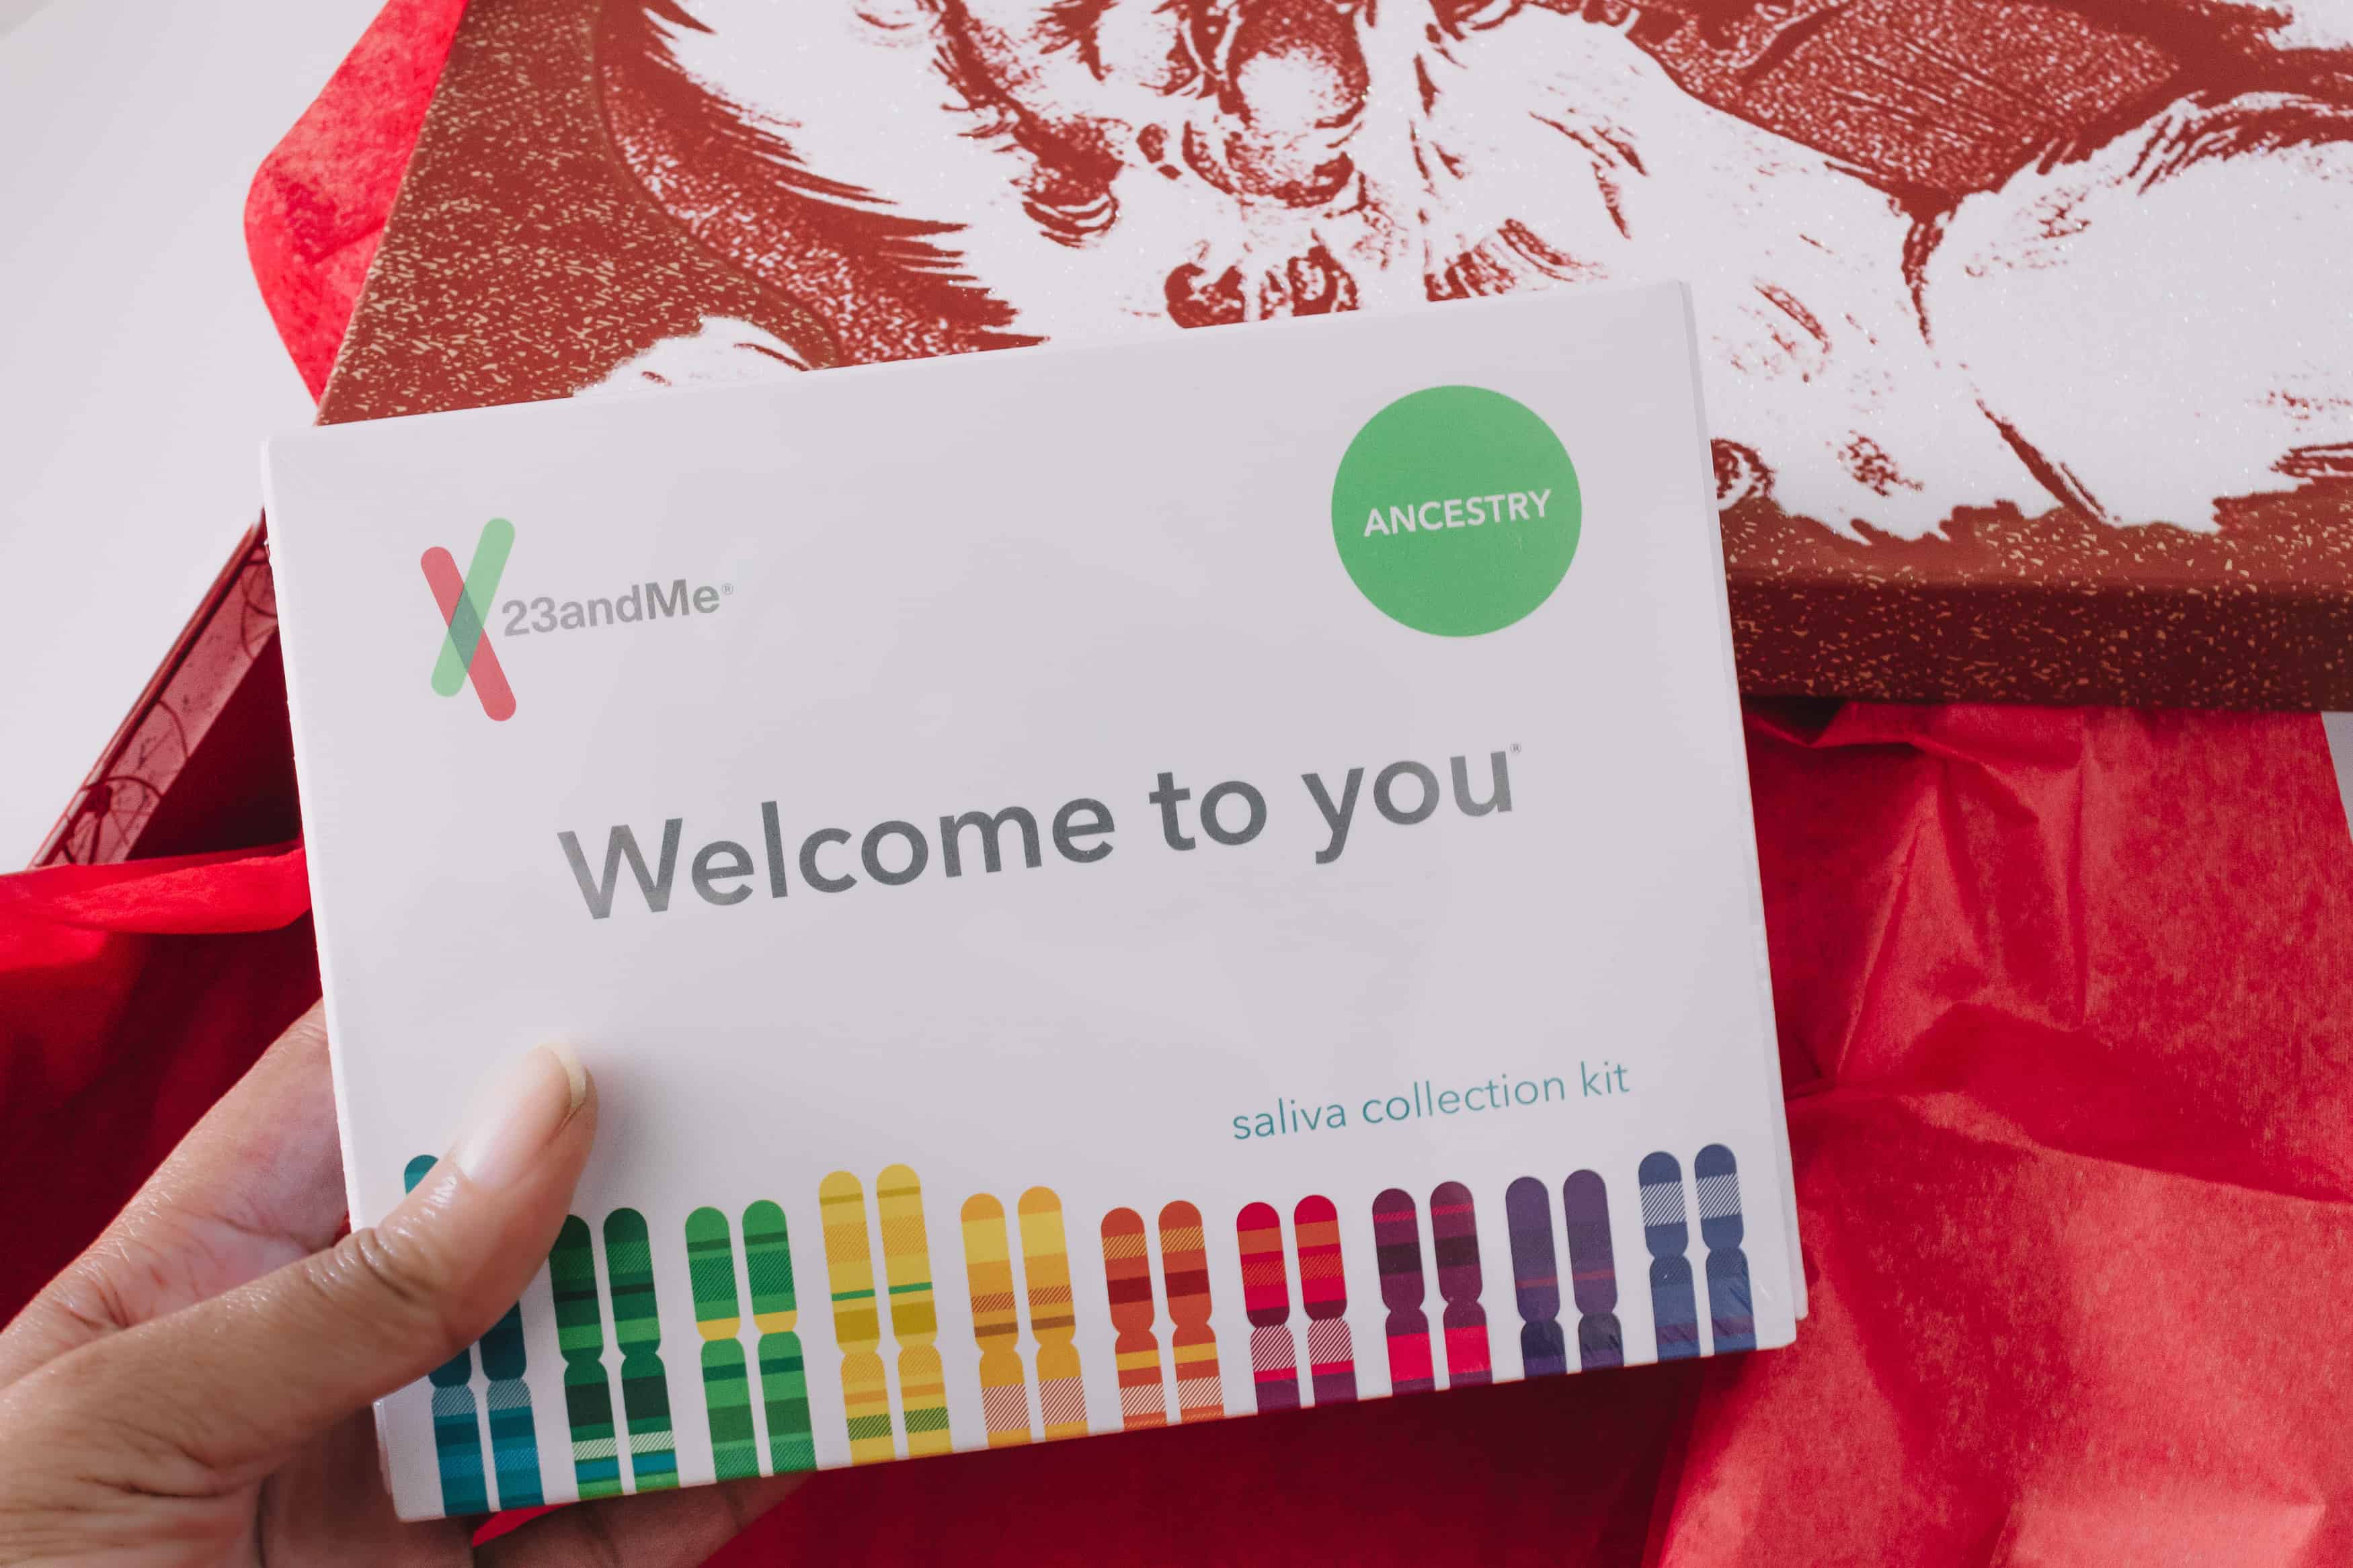 Instead of a practical Christmas gift, give a more meaningful one this year. That’s why @23andMe Ancestry Kit makes the perfect gift for everyone on your holiday list! #ad #23andMeGifting